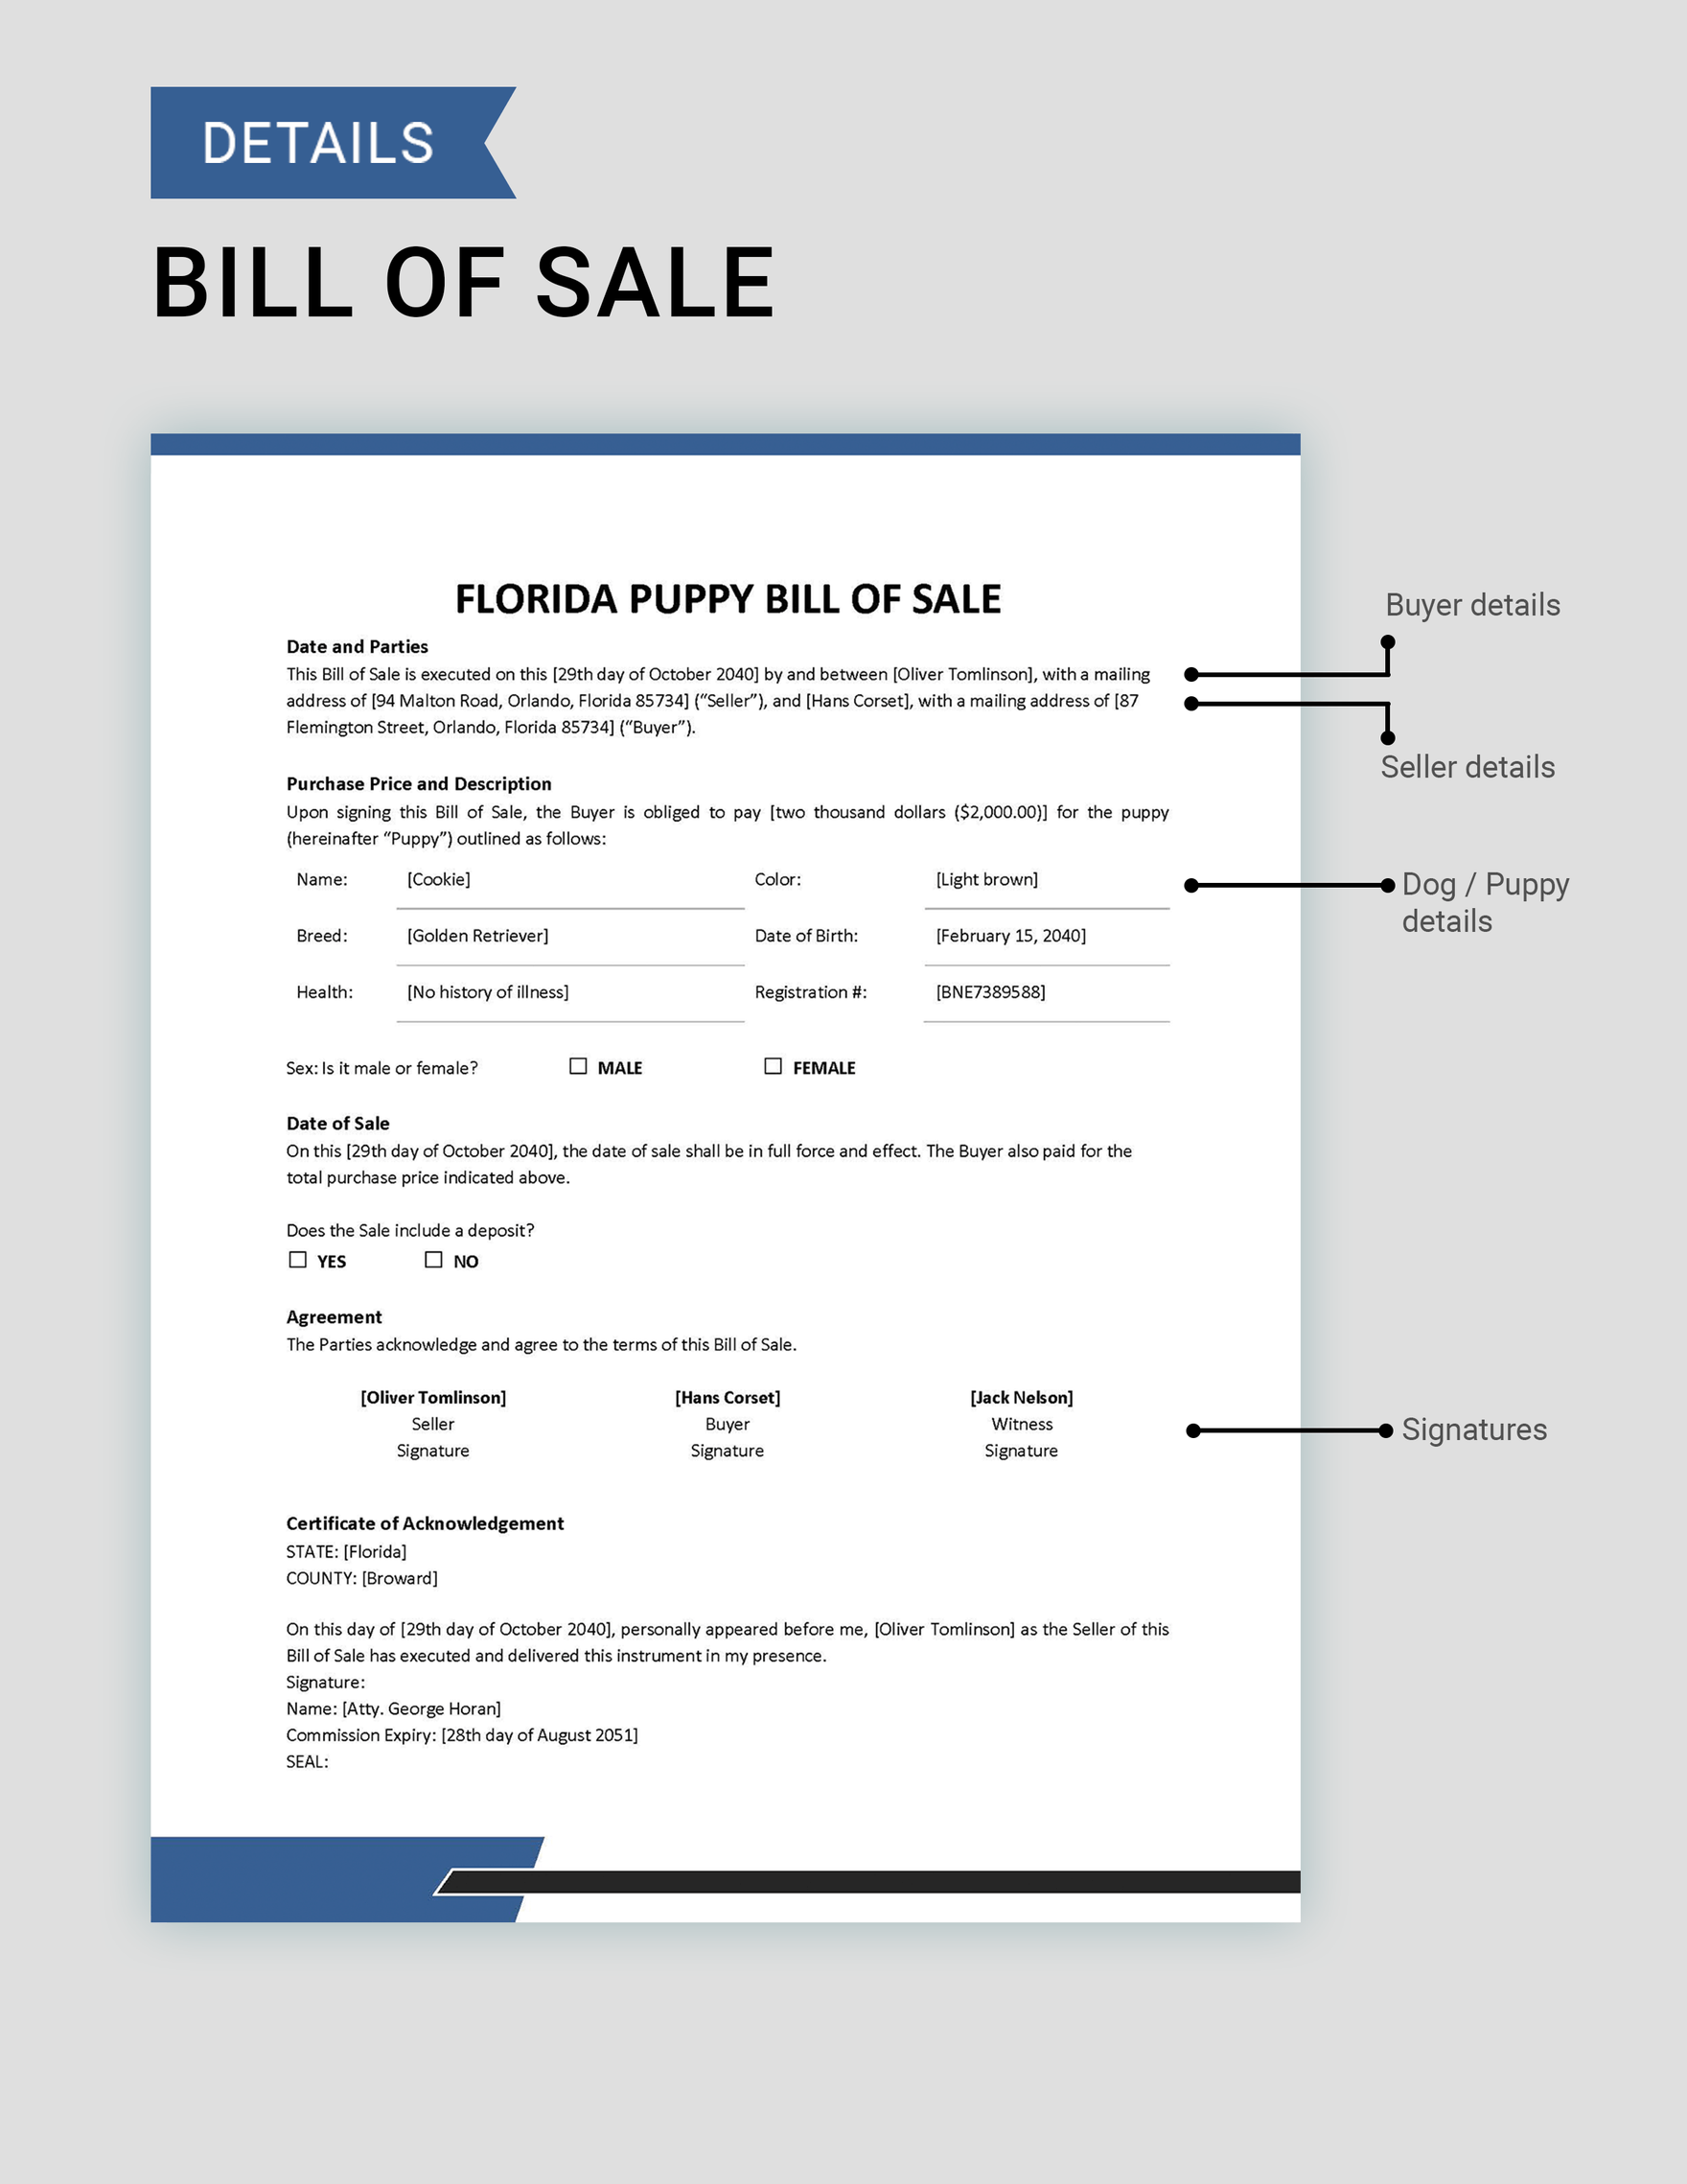 Florida Dog / Puppy Bill of Sale Form Template